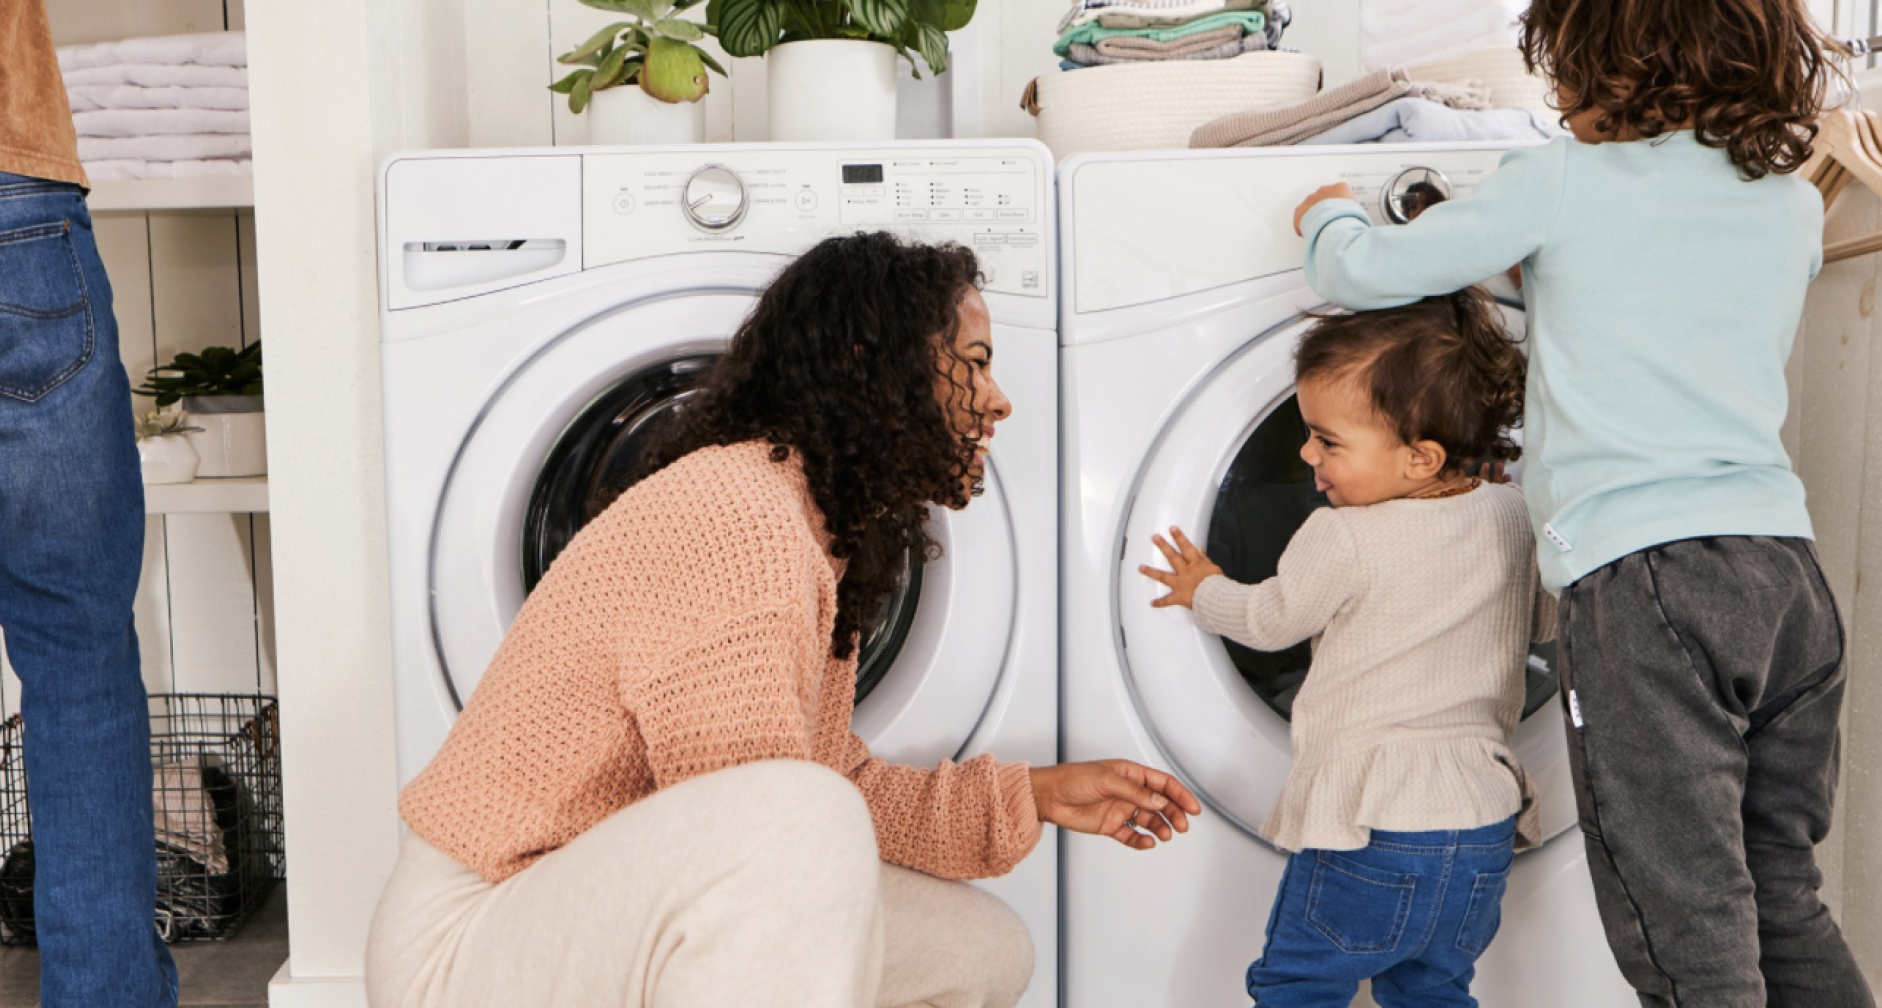 Parent kneels down to play with two children in front of laundry machines